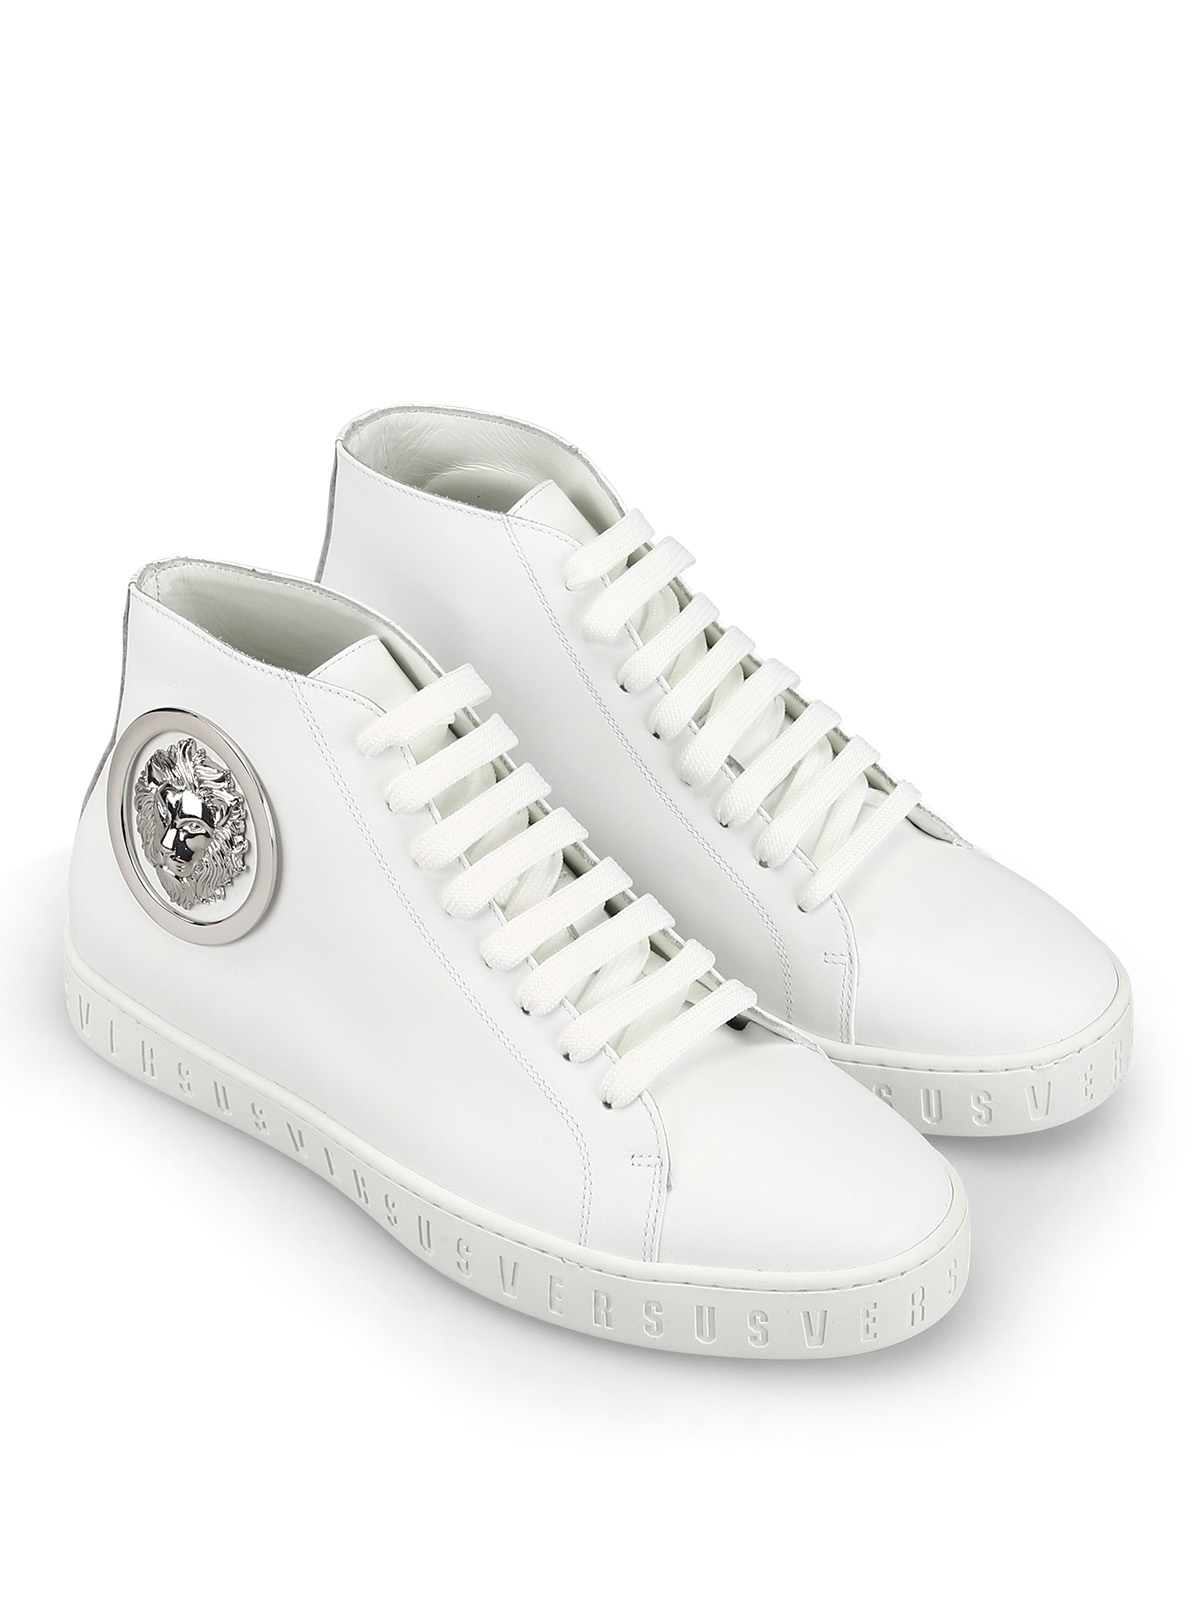 Trainers Versus - Lion Head top white leather sneakers FSX082CFVTF037N